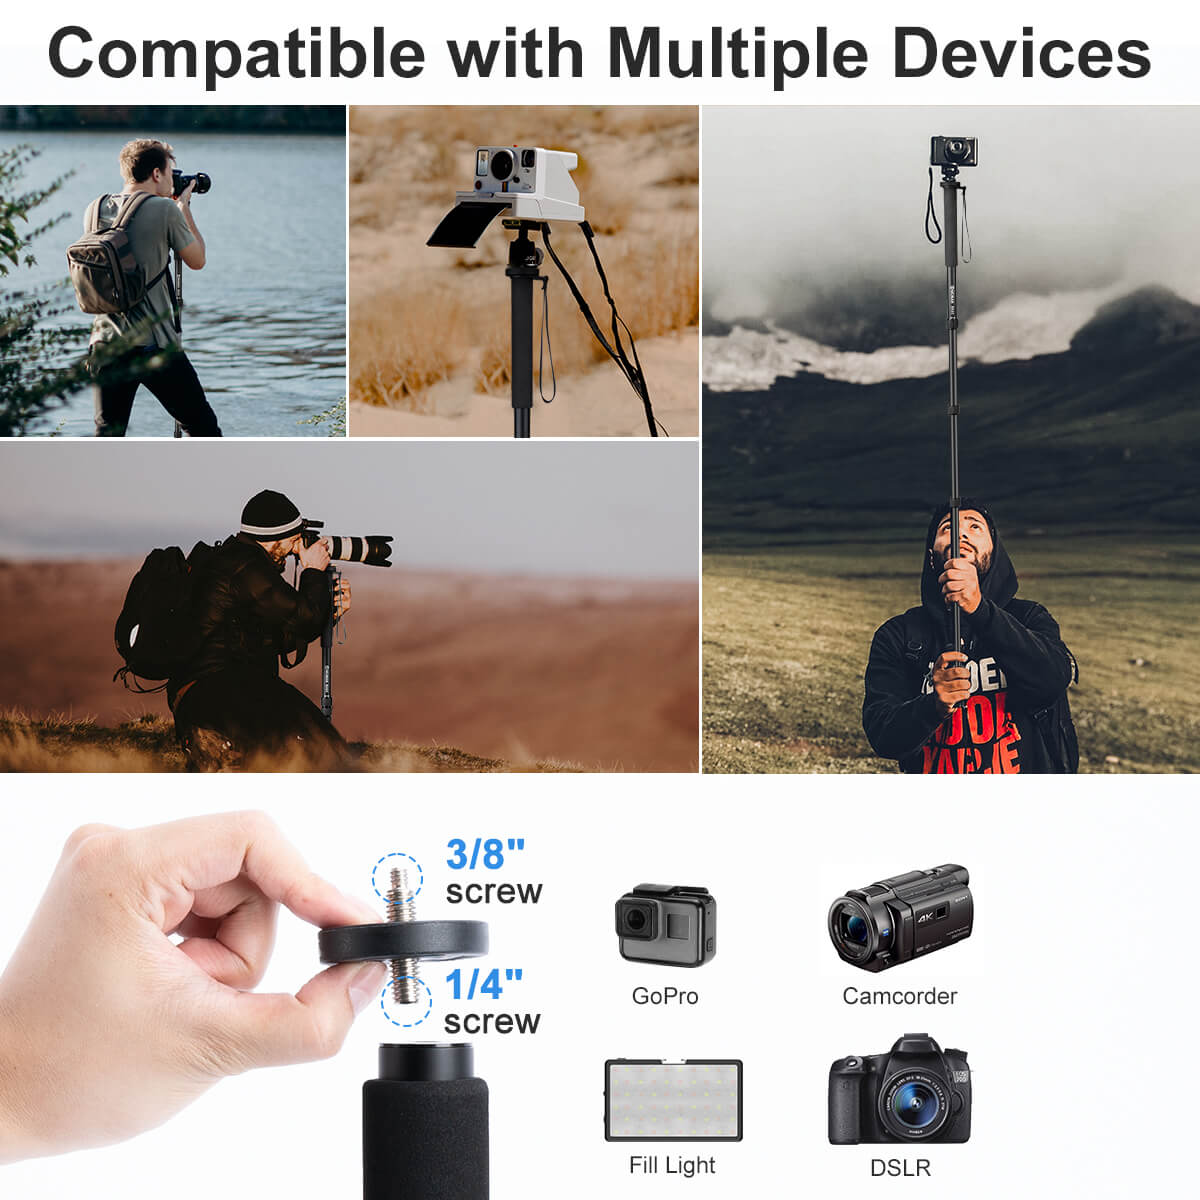 Moman MA65 hiking pole dslr monopod is compatible with multiple devices. Its 3/8